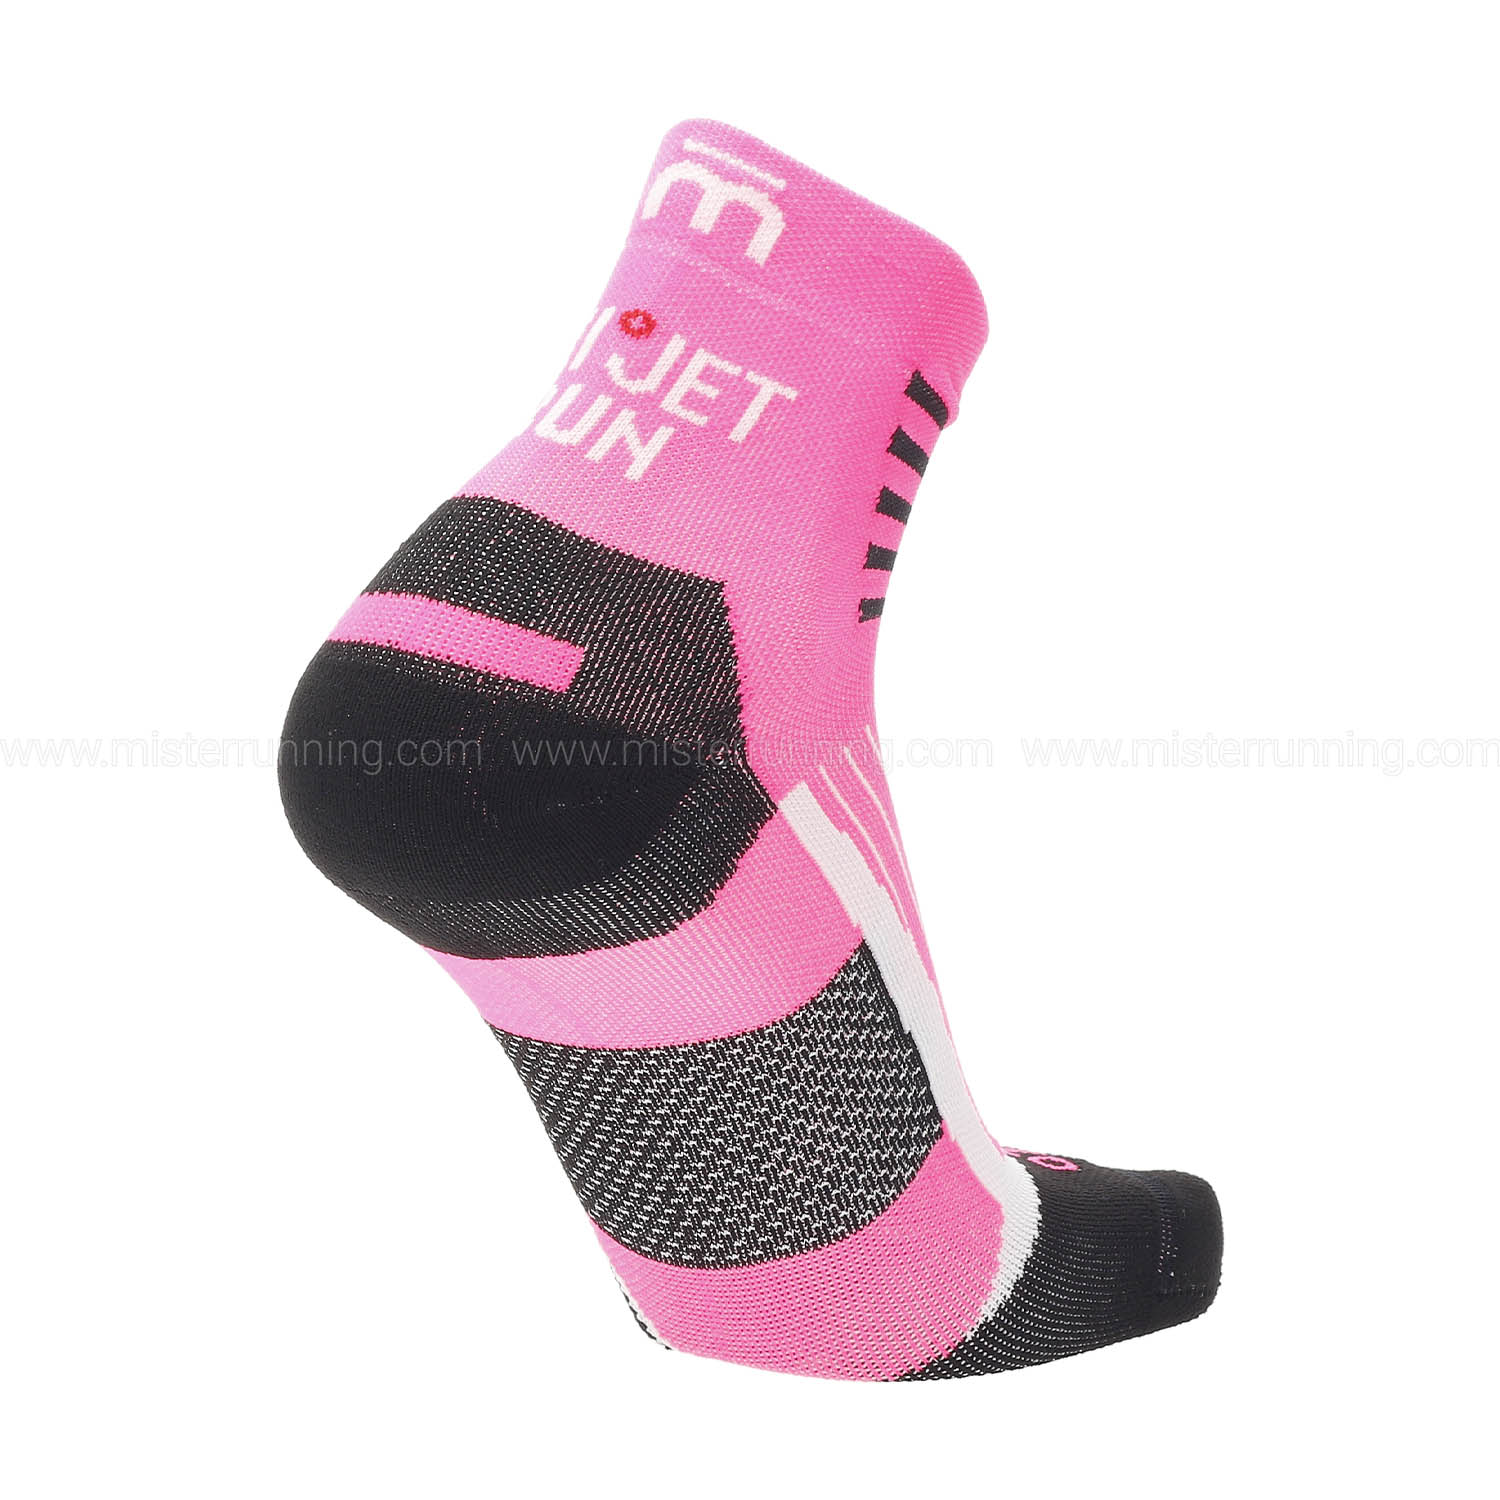 Mico Oxi-jet Light Weight Compression Calcetines - Fucsia Fluo